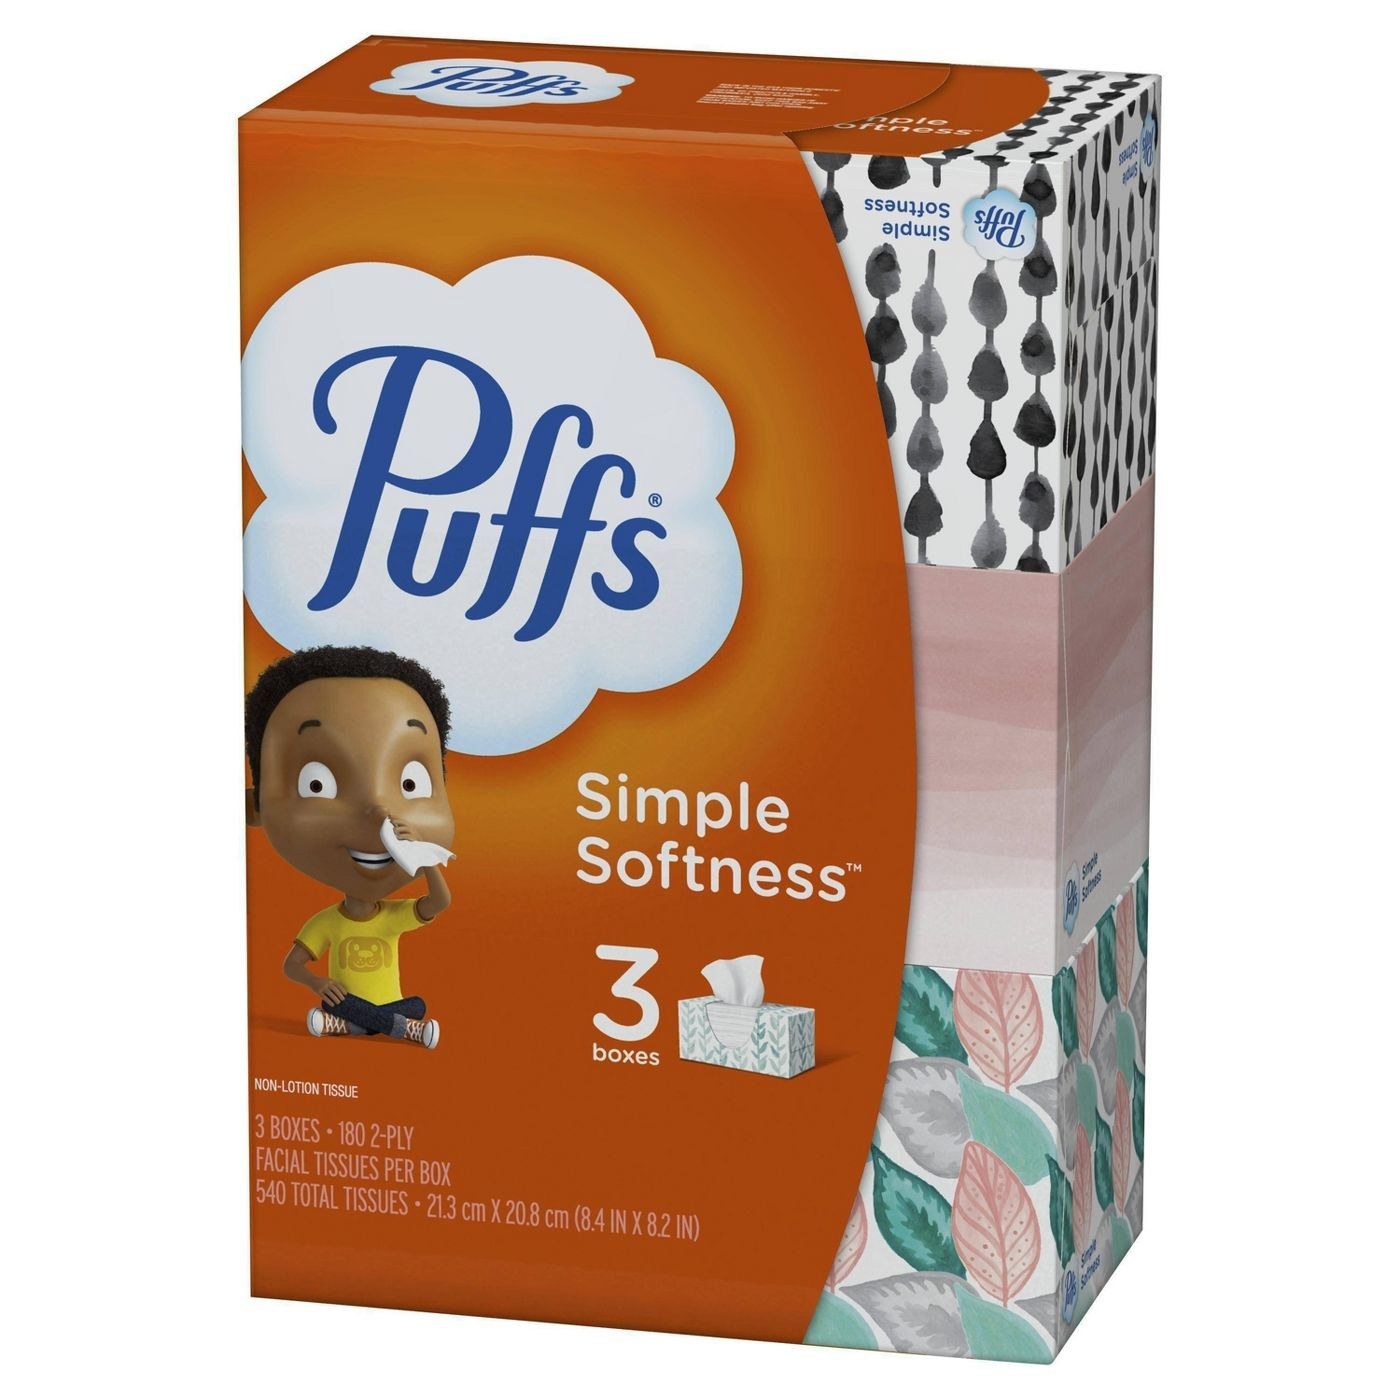 the box of Puffs simple softness